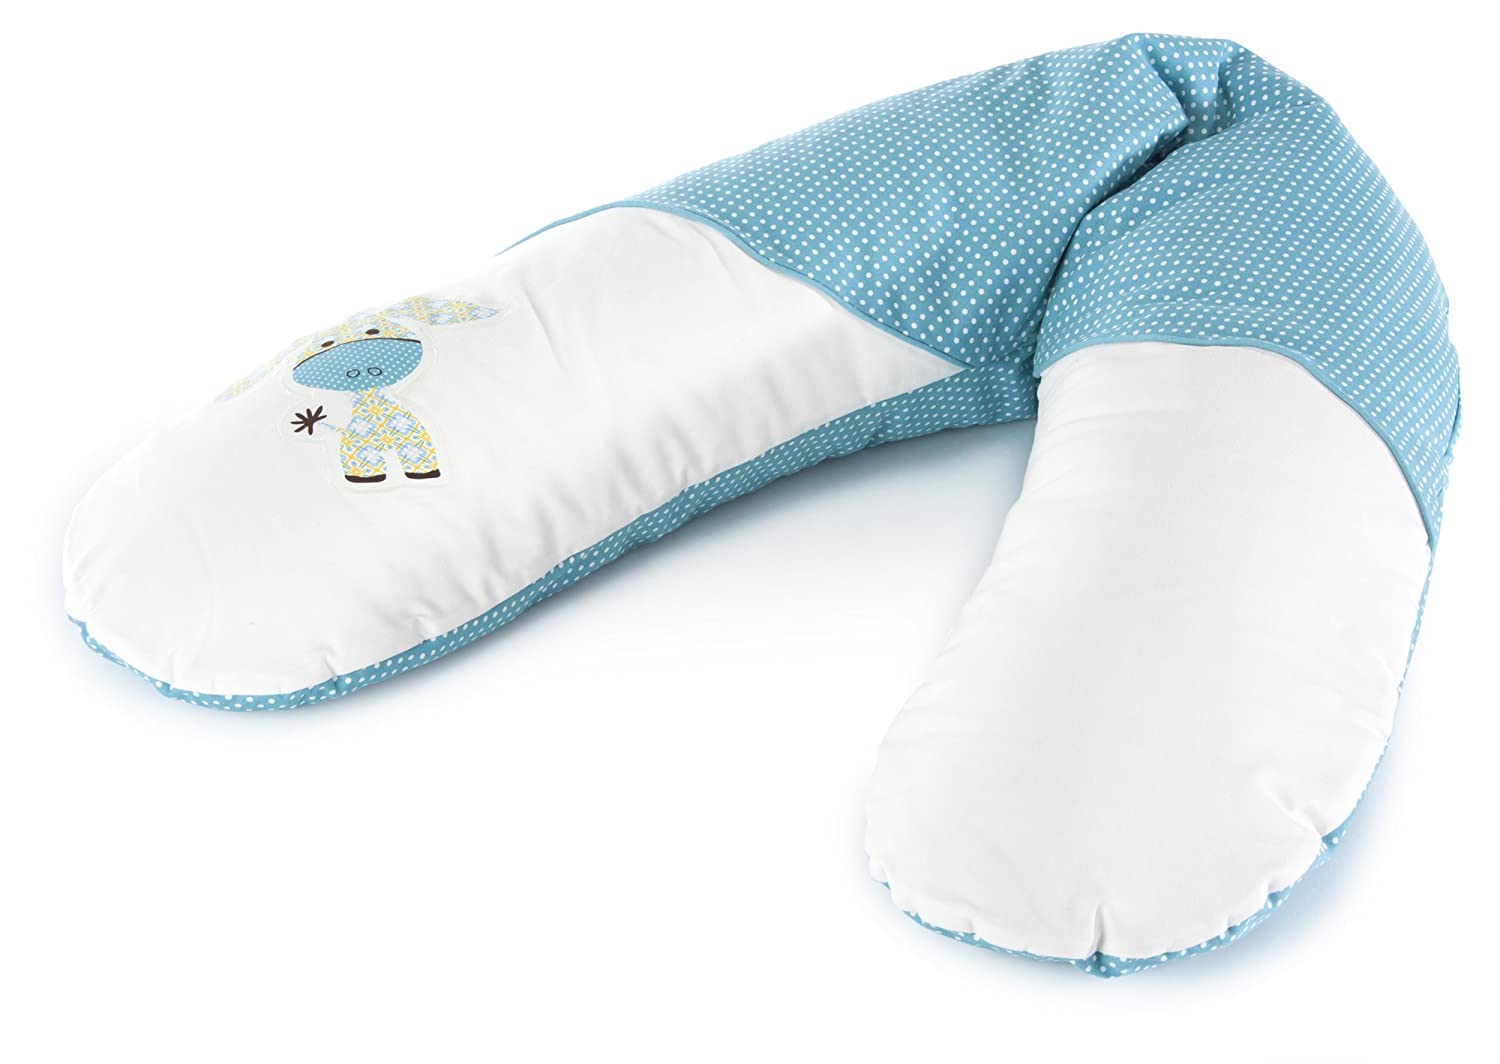 Replacement Cover For The Original Theraline Pregnancy And Nursing Pillow, 